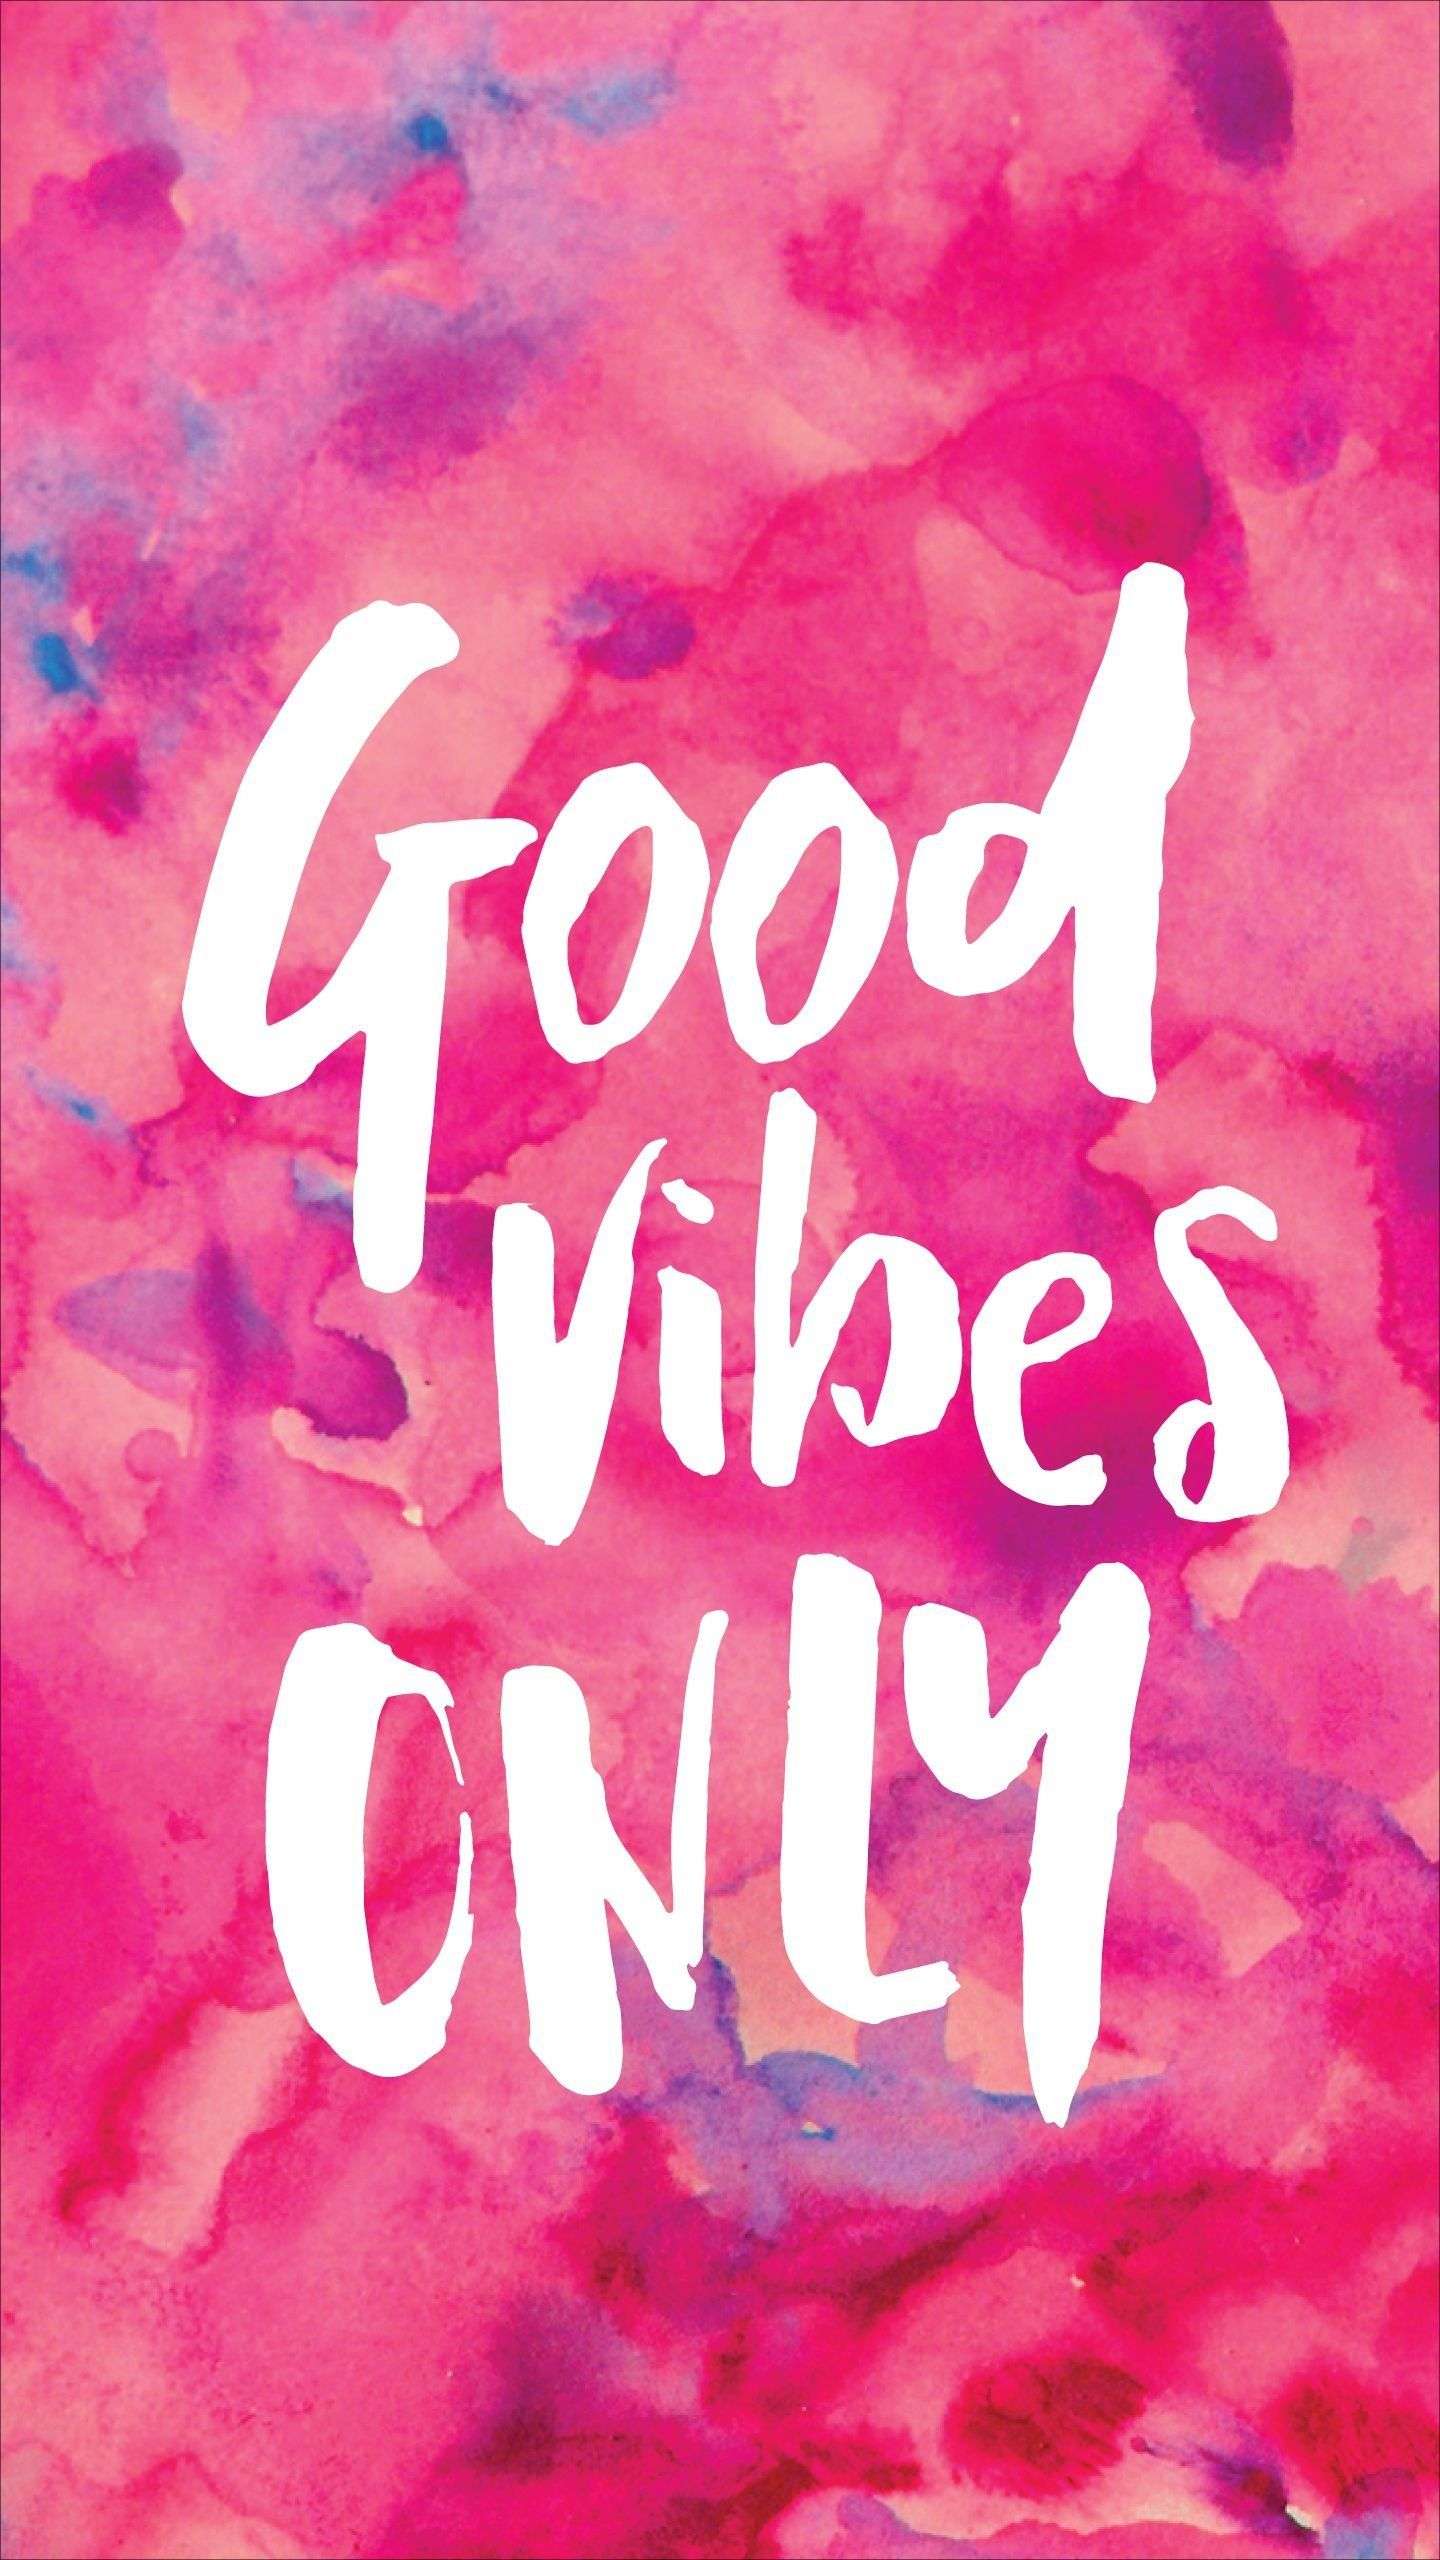 Download Good Vibes Pink Aesthetic Vibes Wallpaper